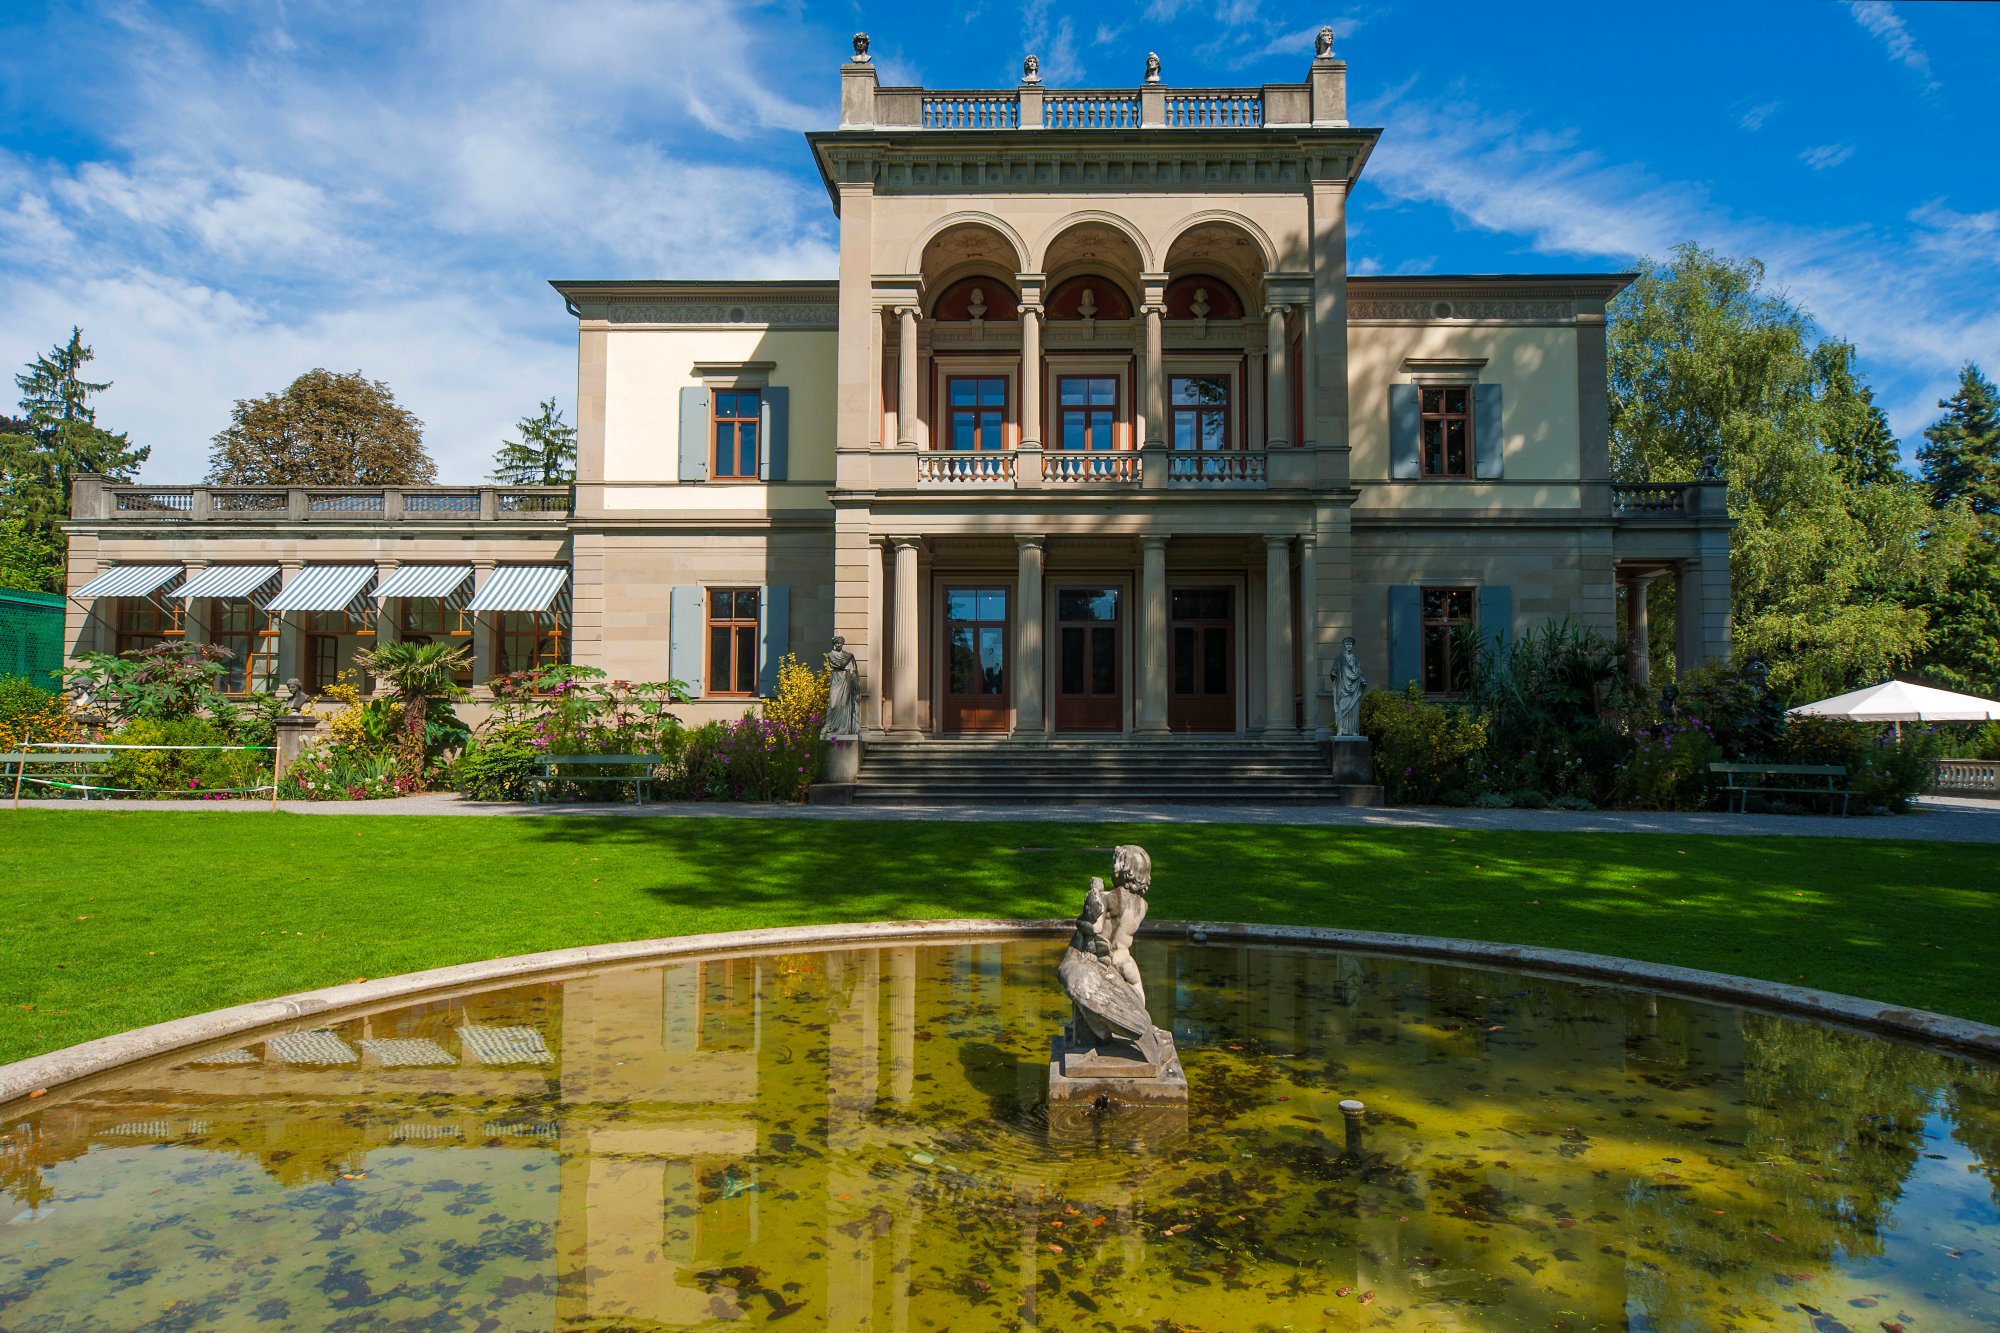 Zurich, Switzerland Museum Rietberg - Villa Wesendonck. (Photo by: Prisma by Dukas/Universal Images Group via Getty Images)